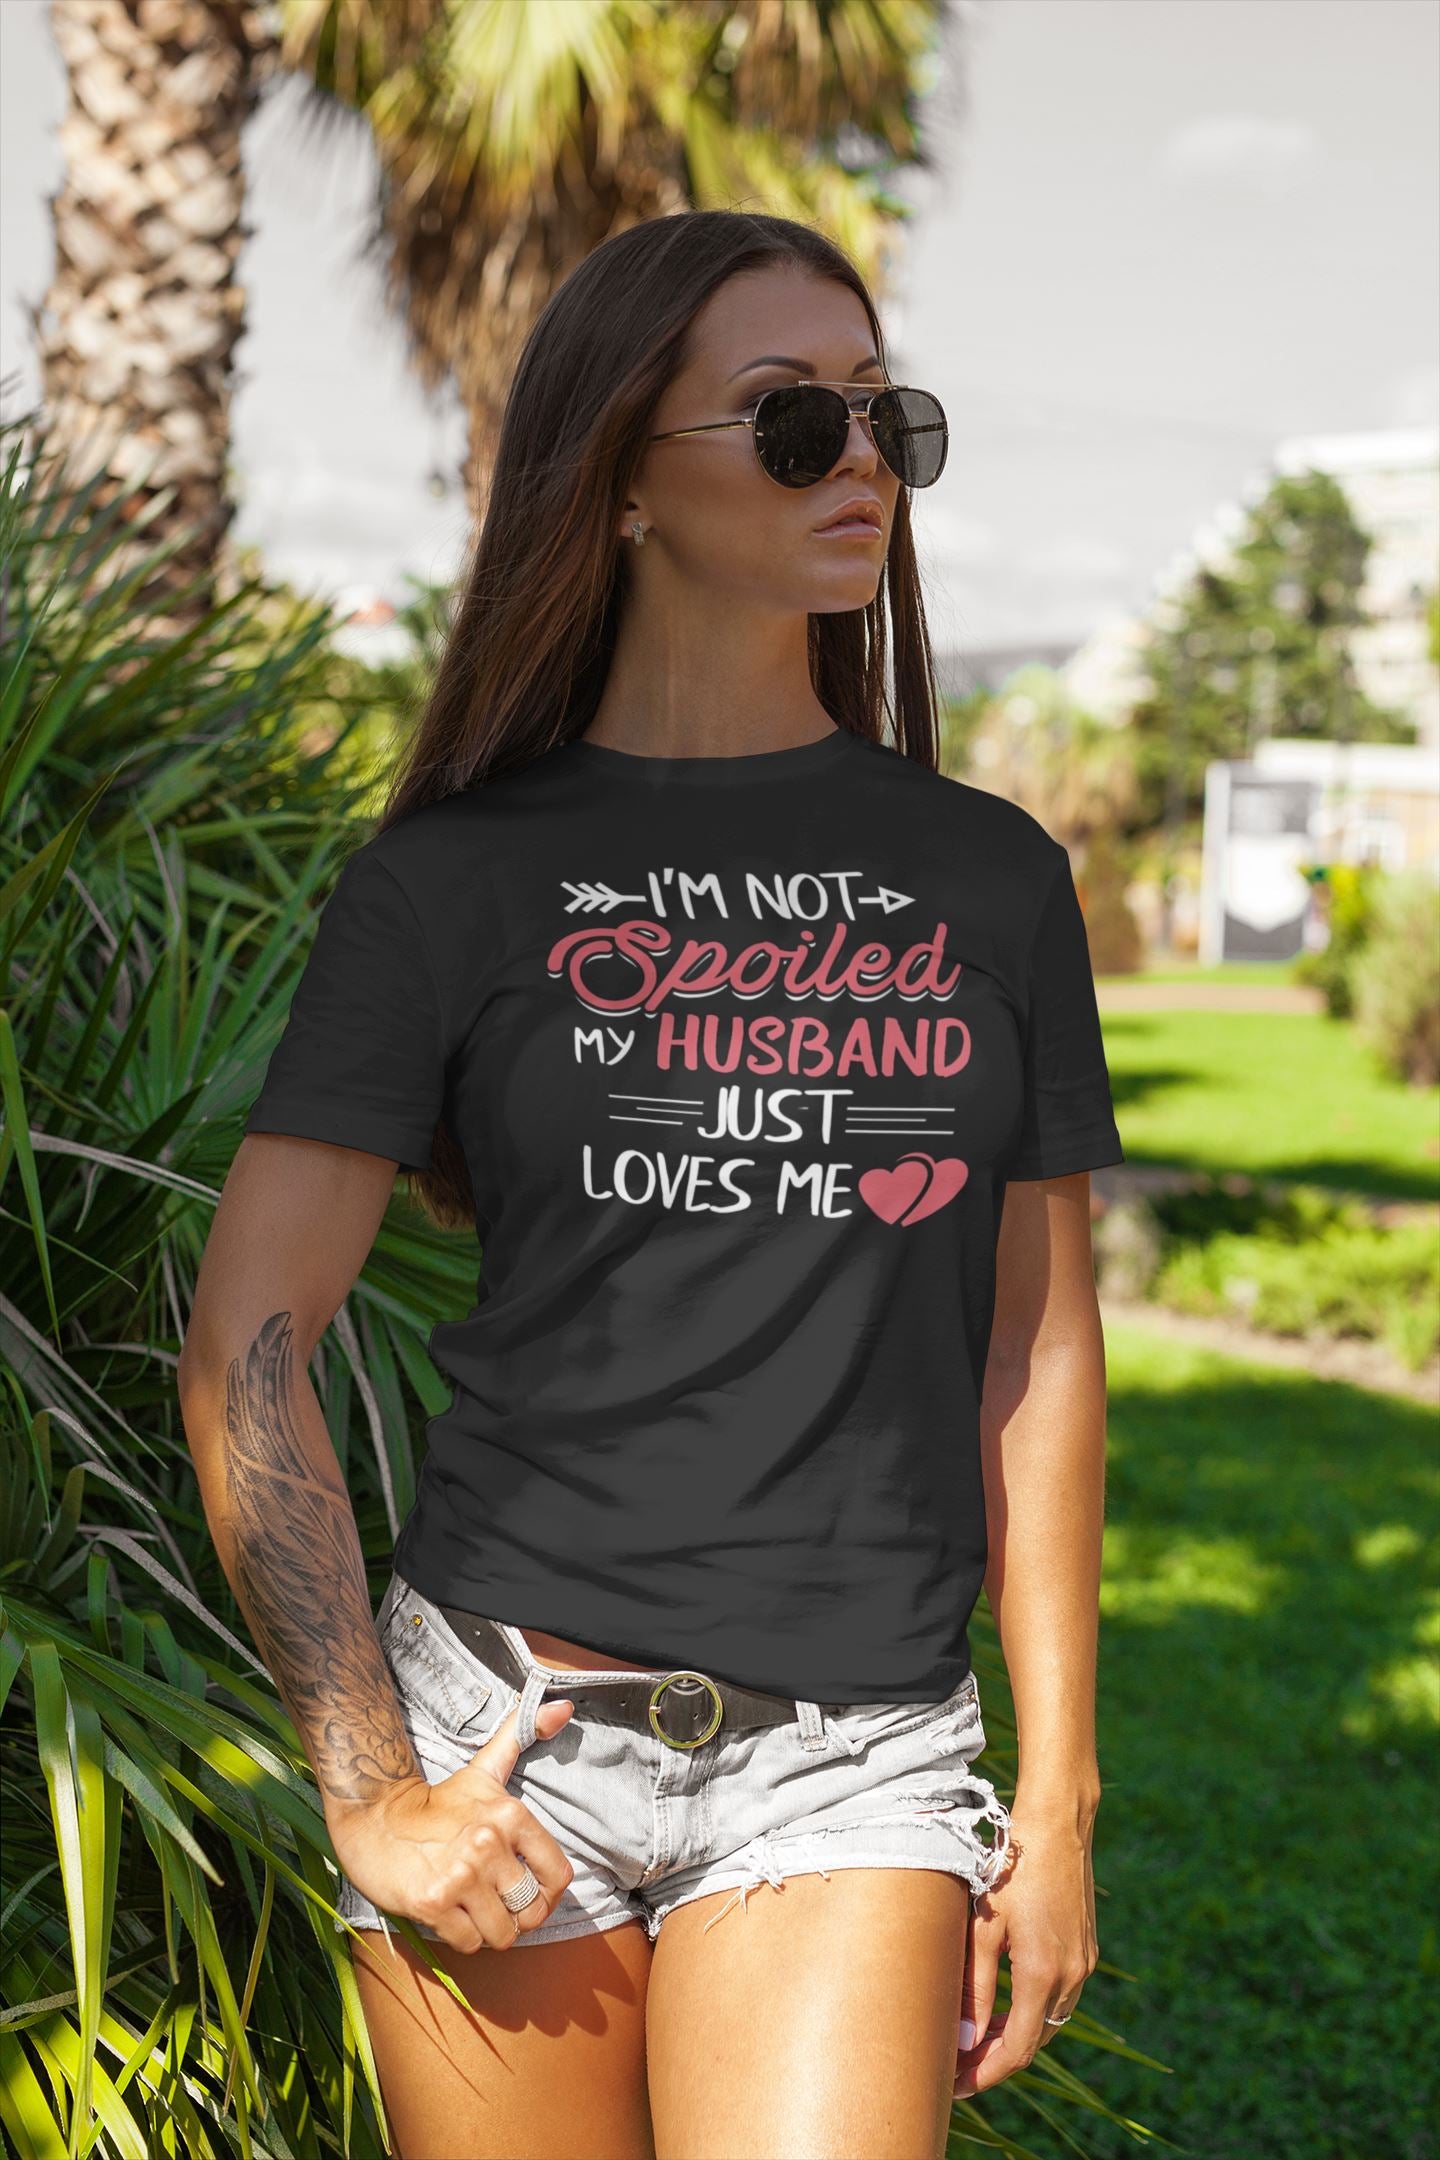 I'm Not Spoiled My Husband Just Loves Me Special Black T Shirt for Women freeshipping - Catch My Drift India